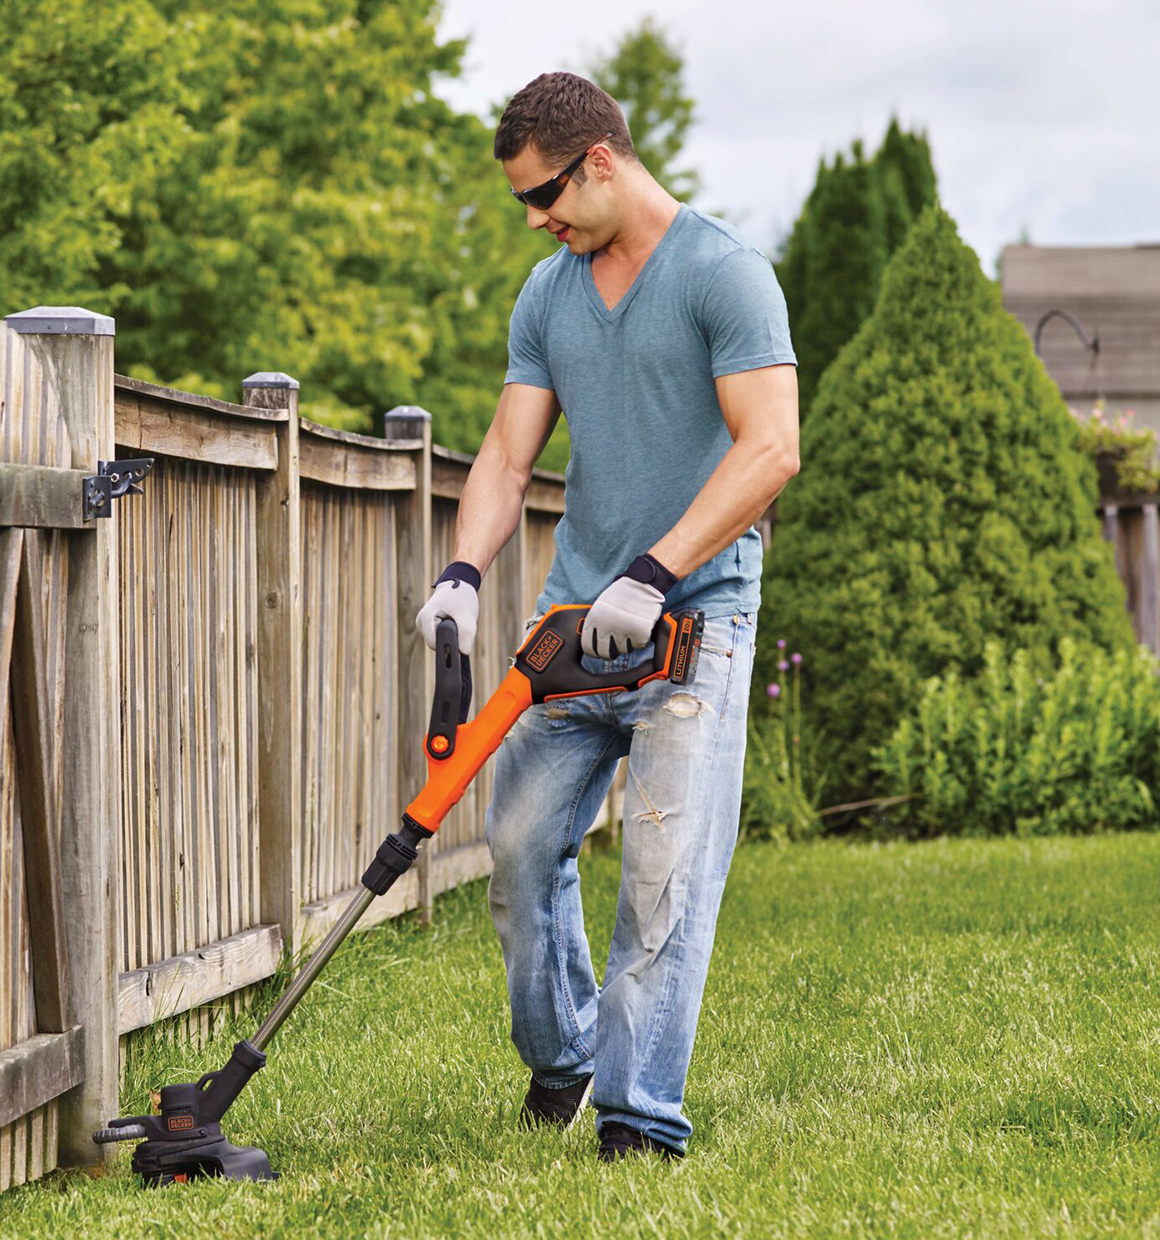  BLACK+DECKER 20V MAX String Trimmer with Extra Lithium Battery  2.0 Amp Hour (LST300 & LBXR2020-OPE) : Patio, Lawn & Garden